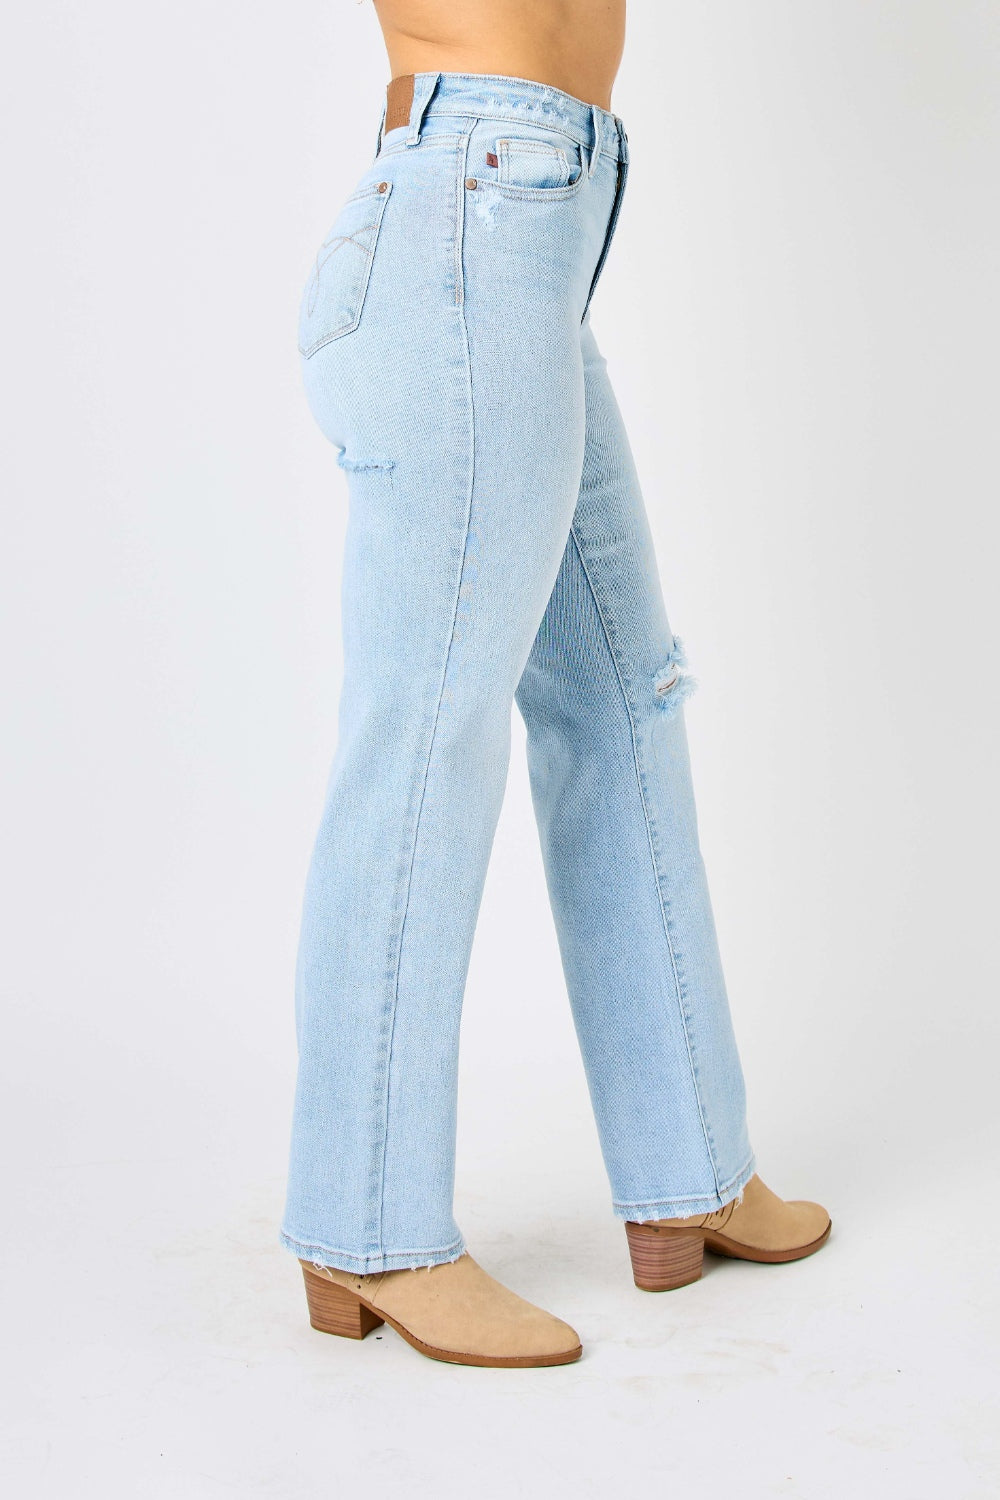 Callie - High Waist Distressed Straight Jeans - Judy Blue - Exclusively Online